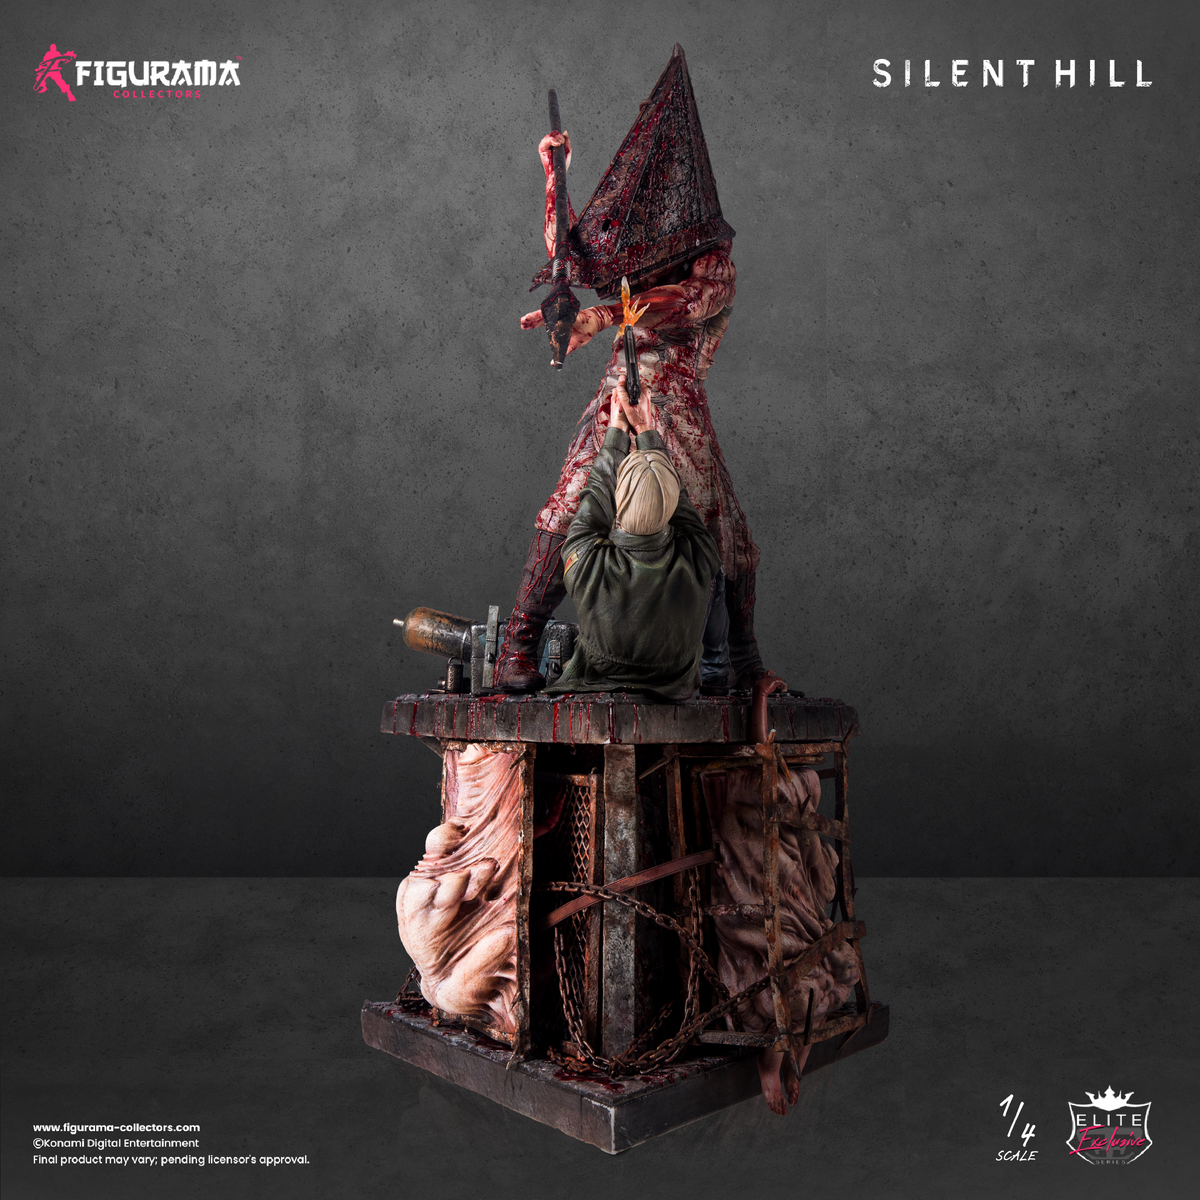 This Custom Pyramid Head Sculpture Is Just Begging For My Money